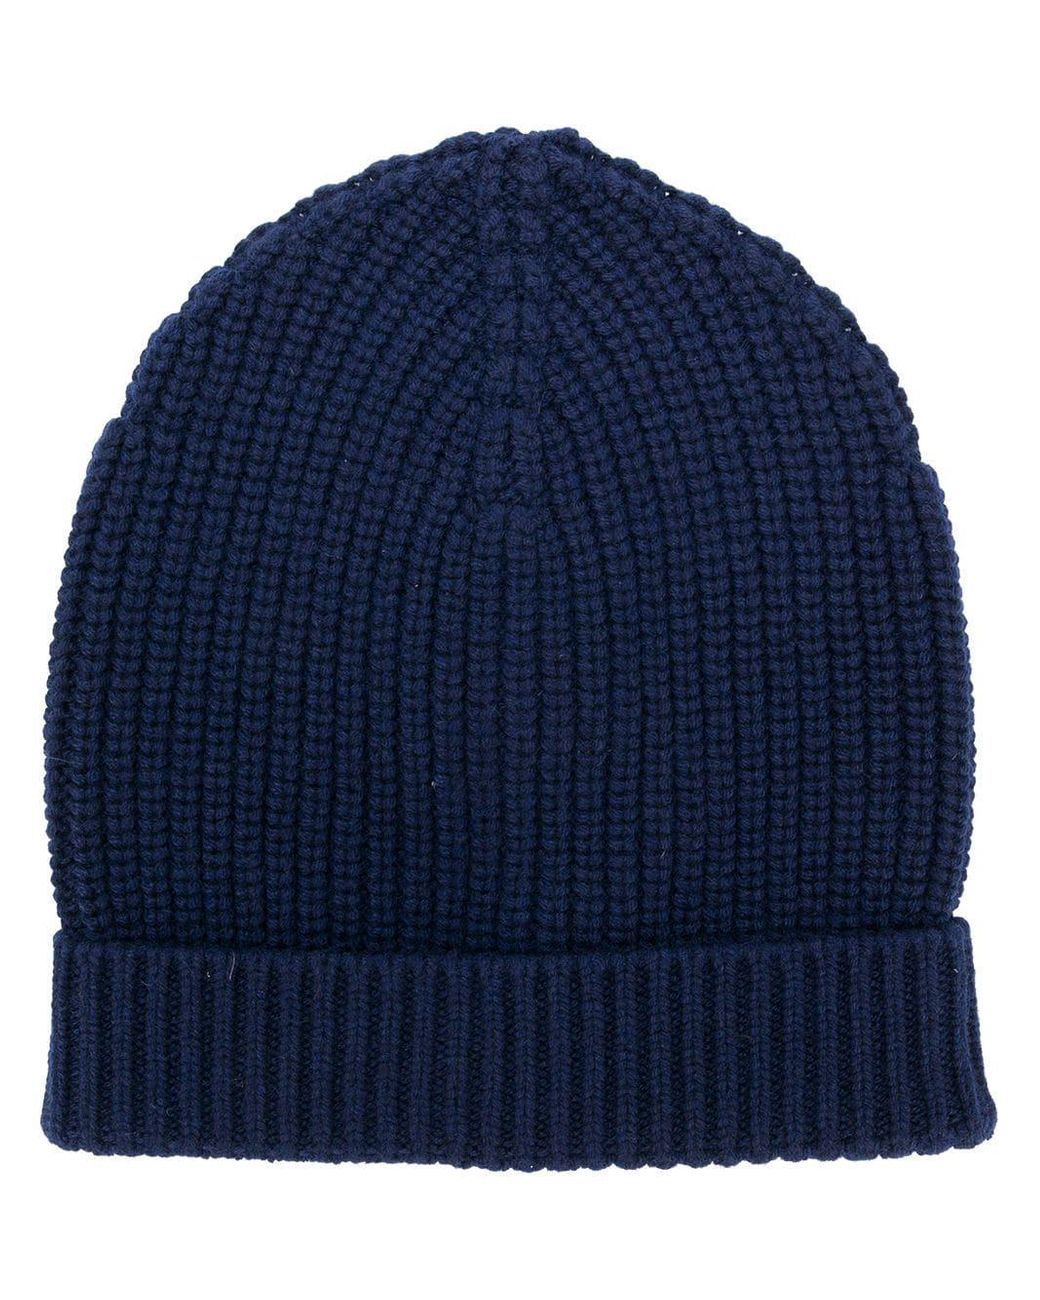 Dolce & Gabbana Cashmere Ribbed Knit Beanie in Blue for Men - Lyst